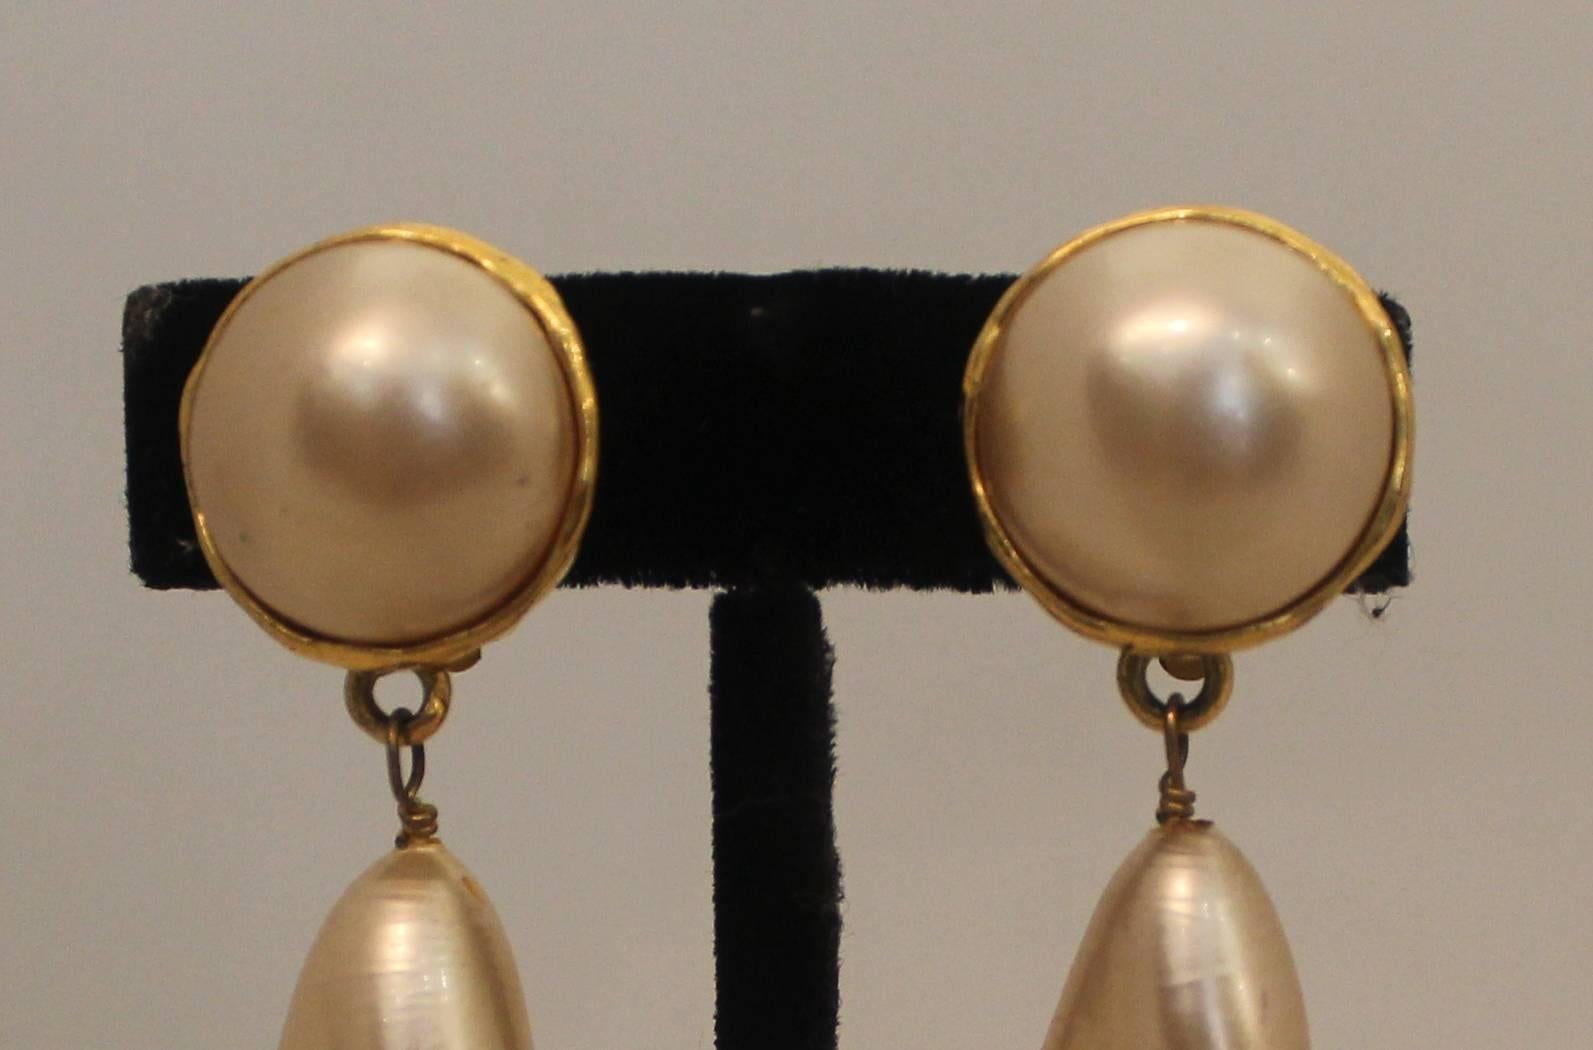 Chanel Vintage Goldtone Pearl Drop Clip-on Earrings - circa 1991. These earrings are in excellent vintage condition and are very classic. The goldtone around the pearl has a hammered look to it. 

Length- 3